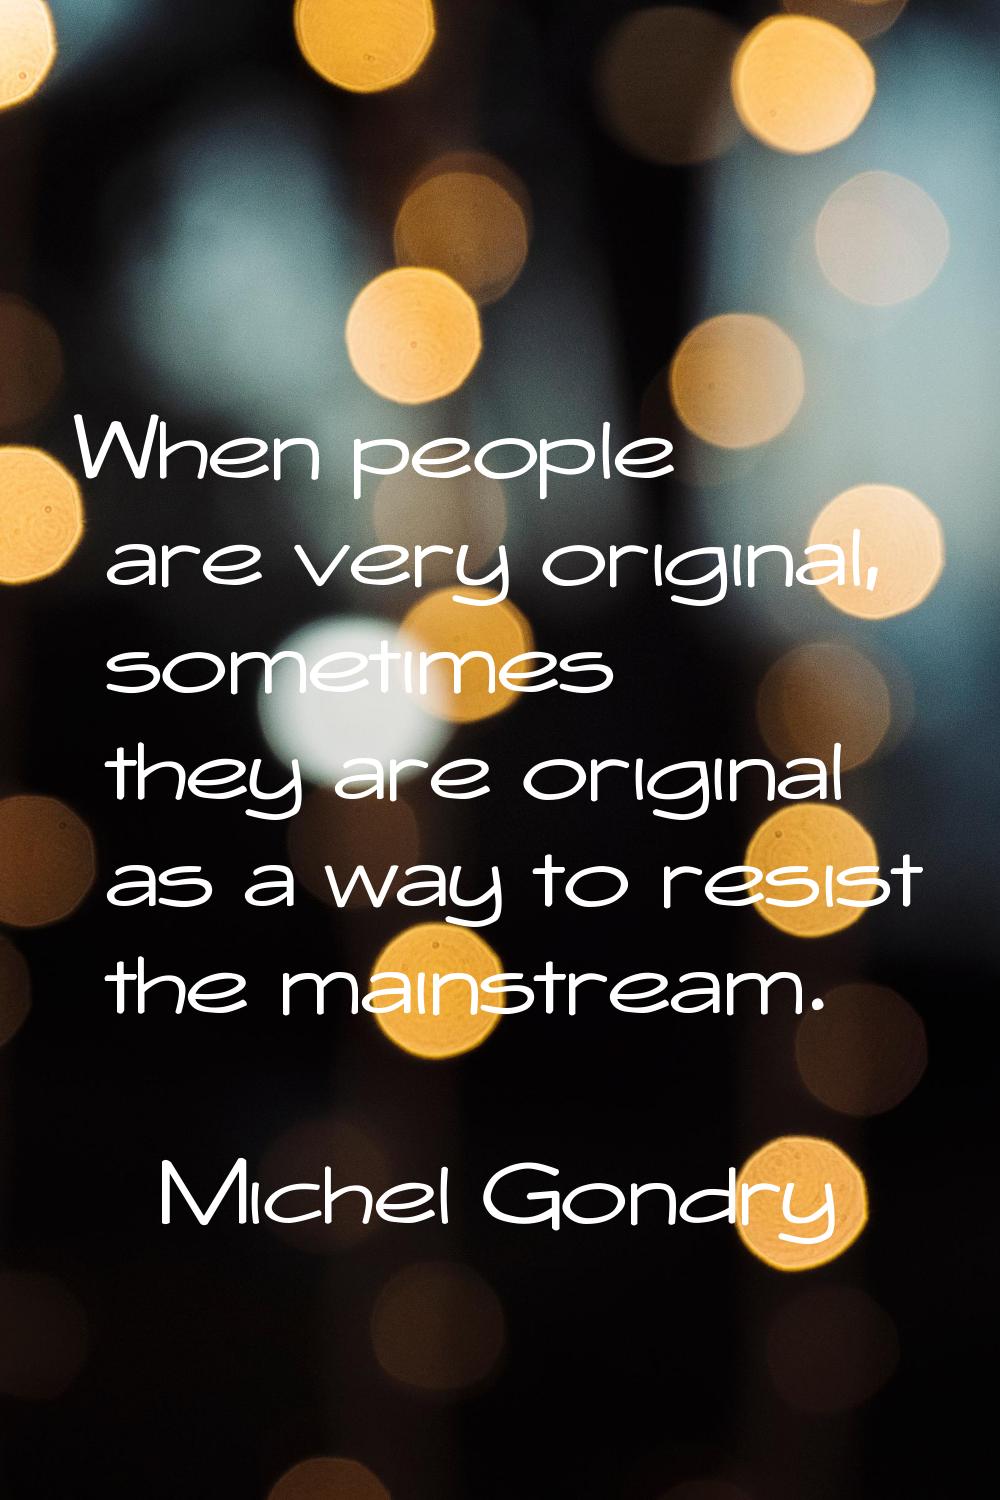 When people are very original, sometimes they are original as a way to resist the mainstream.